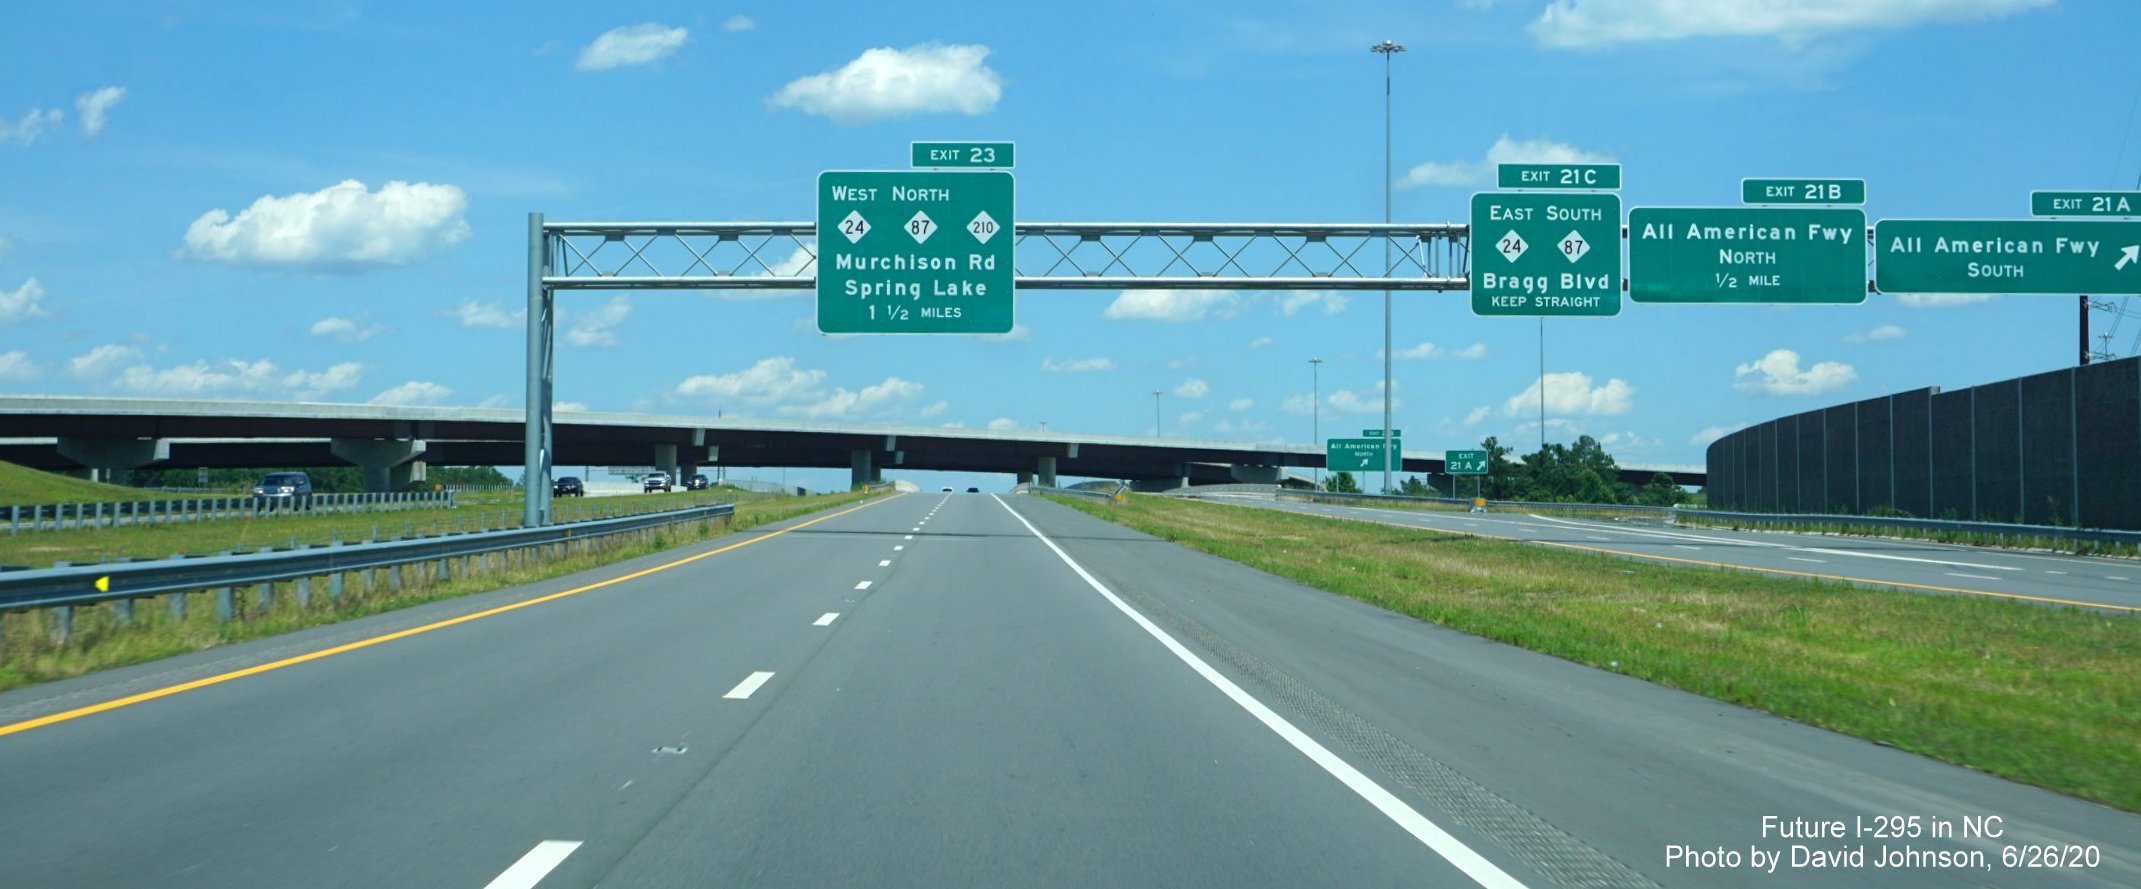 Image of overhead signage on I-295 North and along Bragg Blvd exit C/D ramp, by David Johnson June 2020